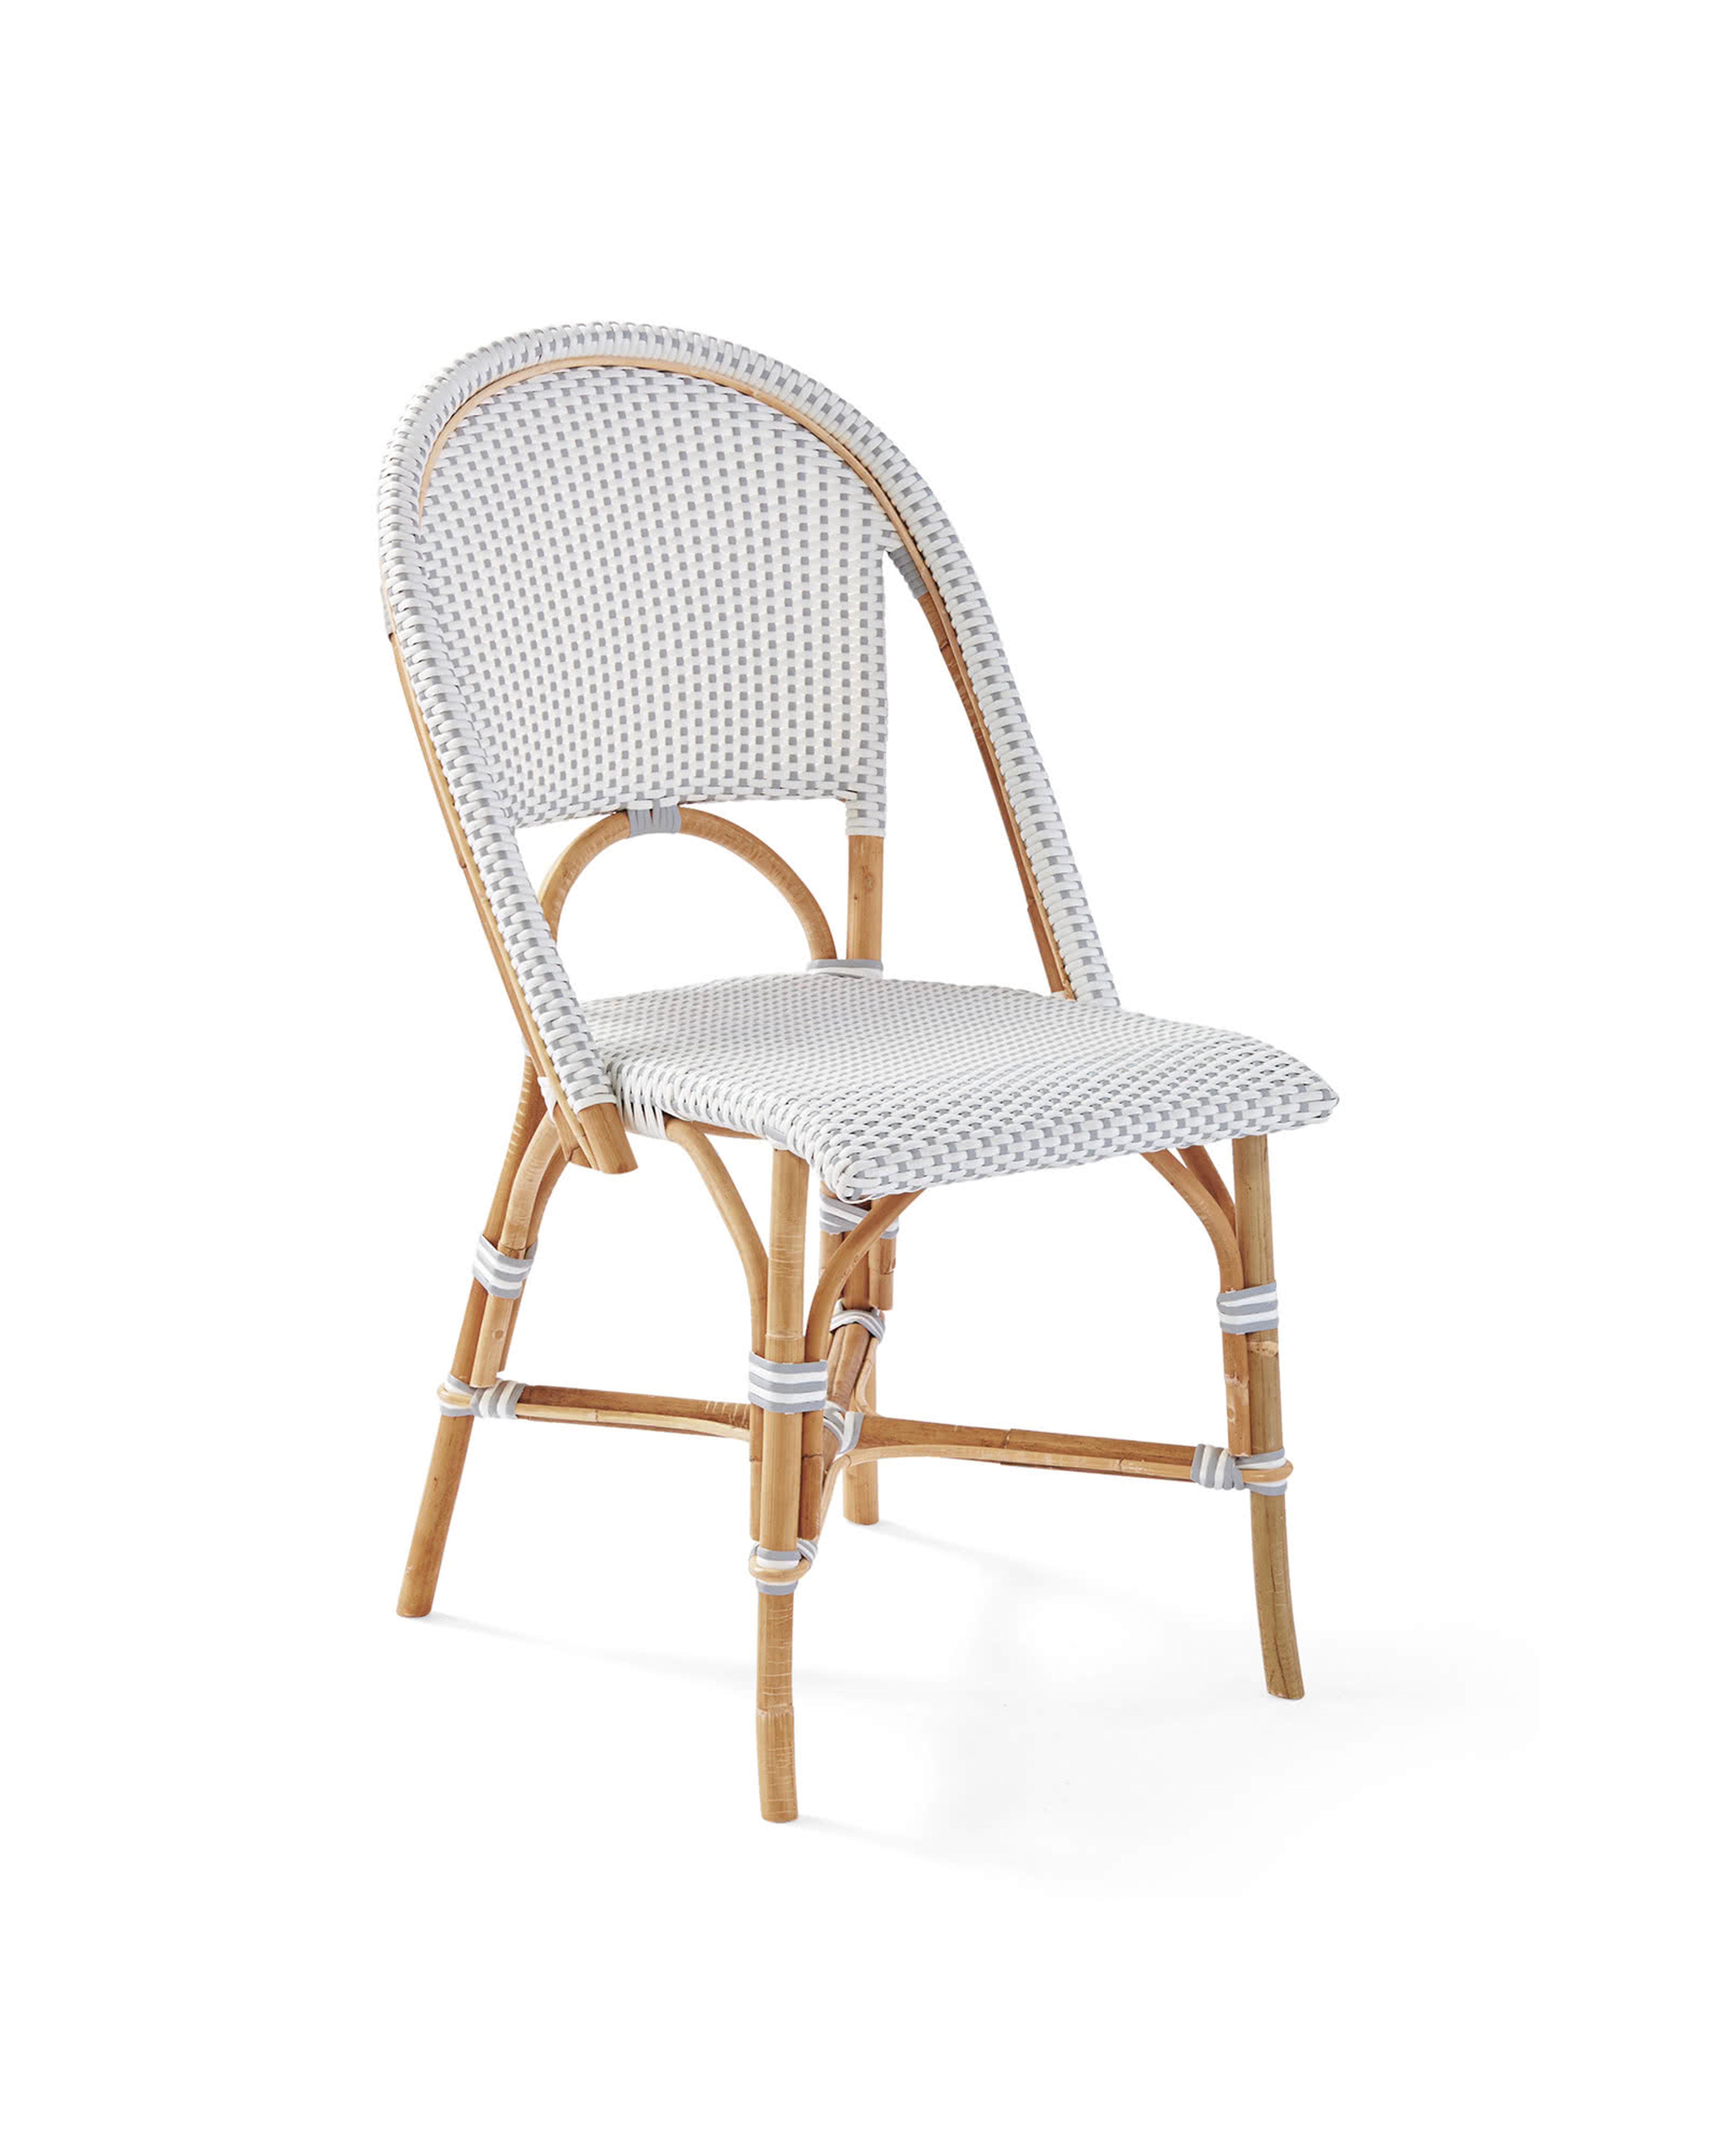 Riviera Dining Chair - Serena and Lily